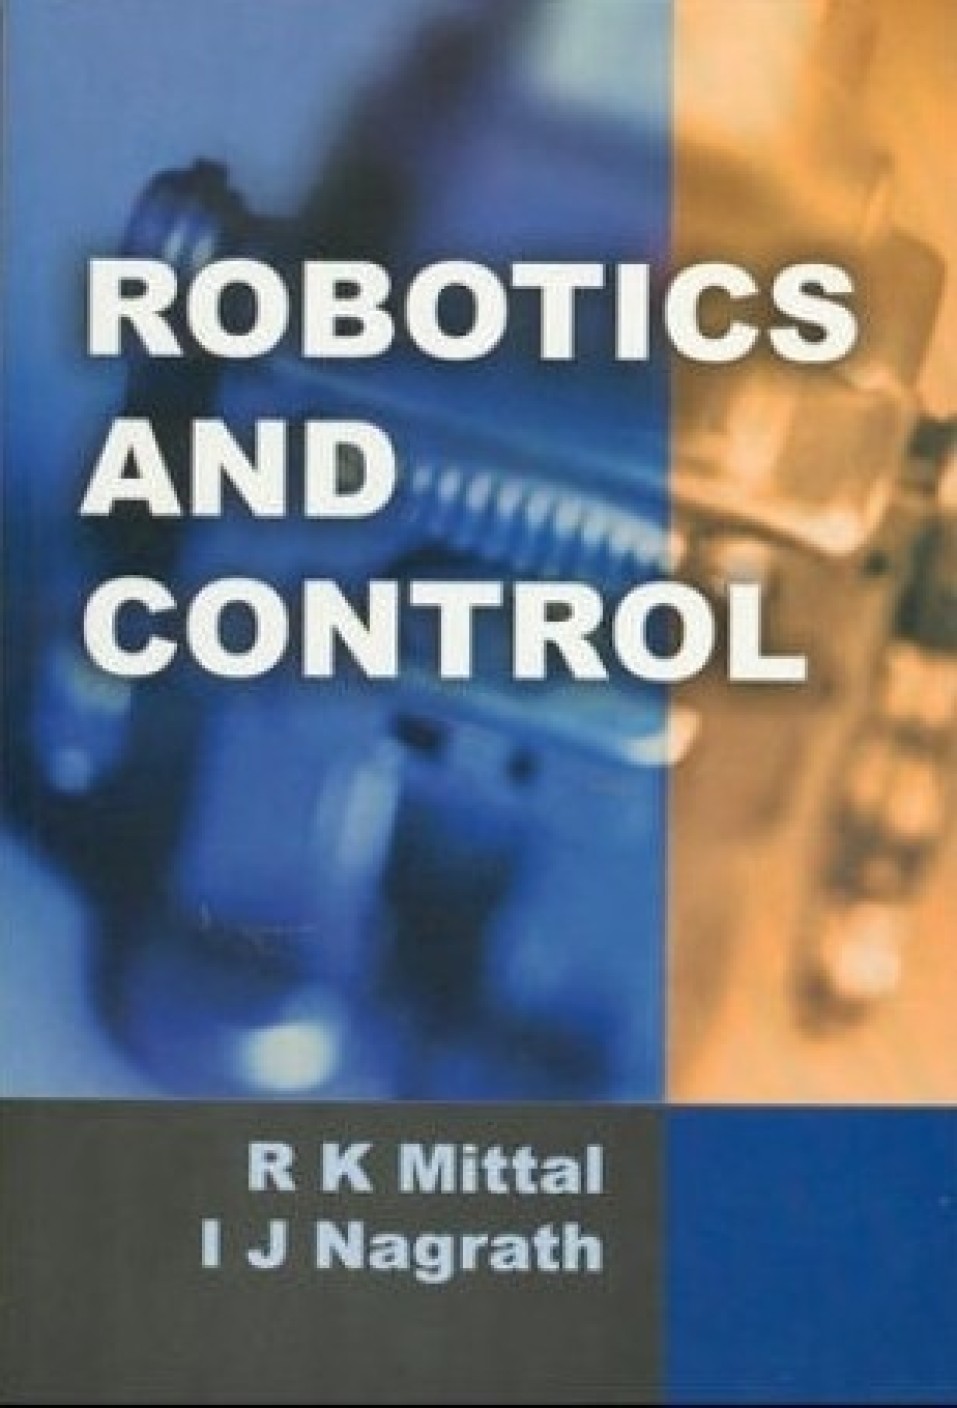 download free pdf of control systems by nagrath and gopal